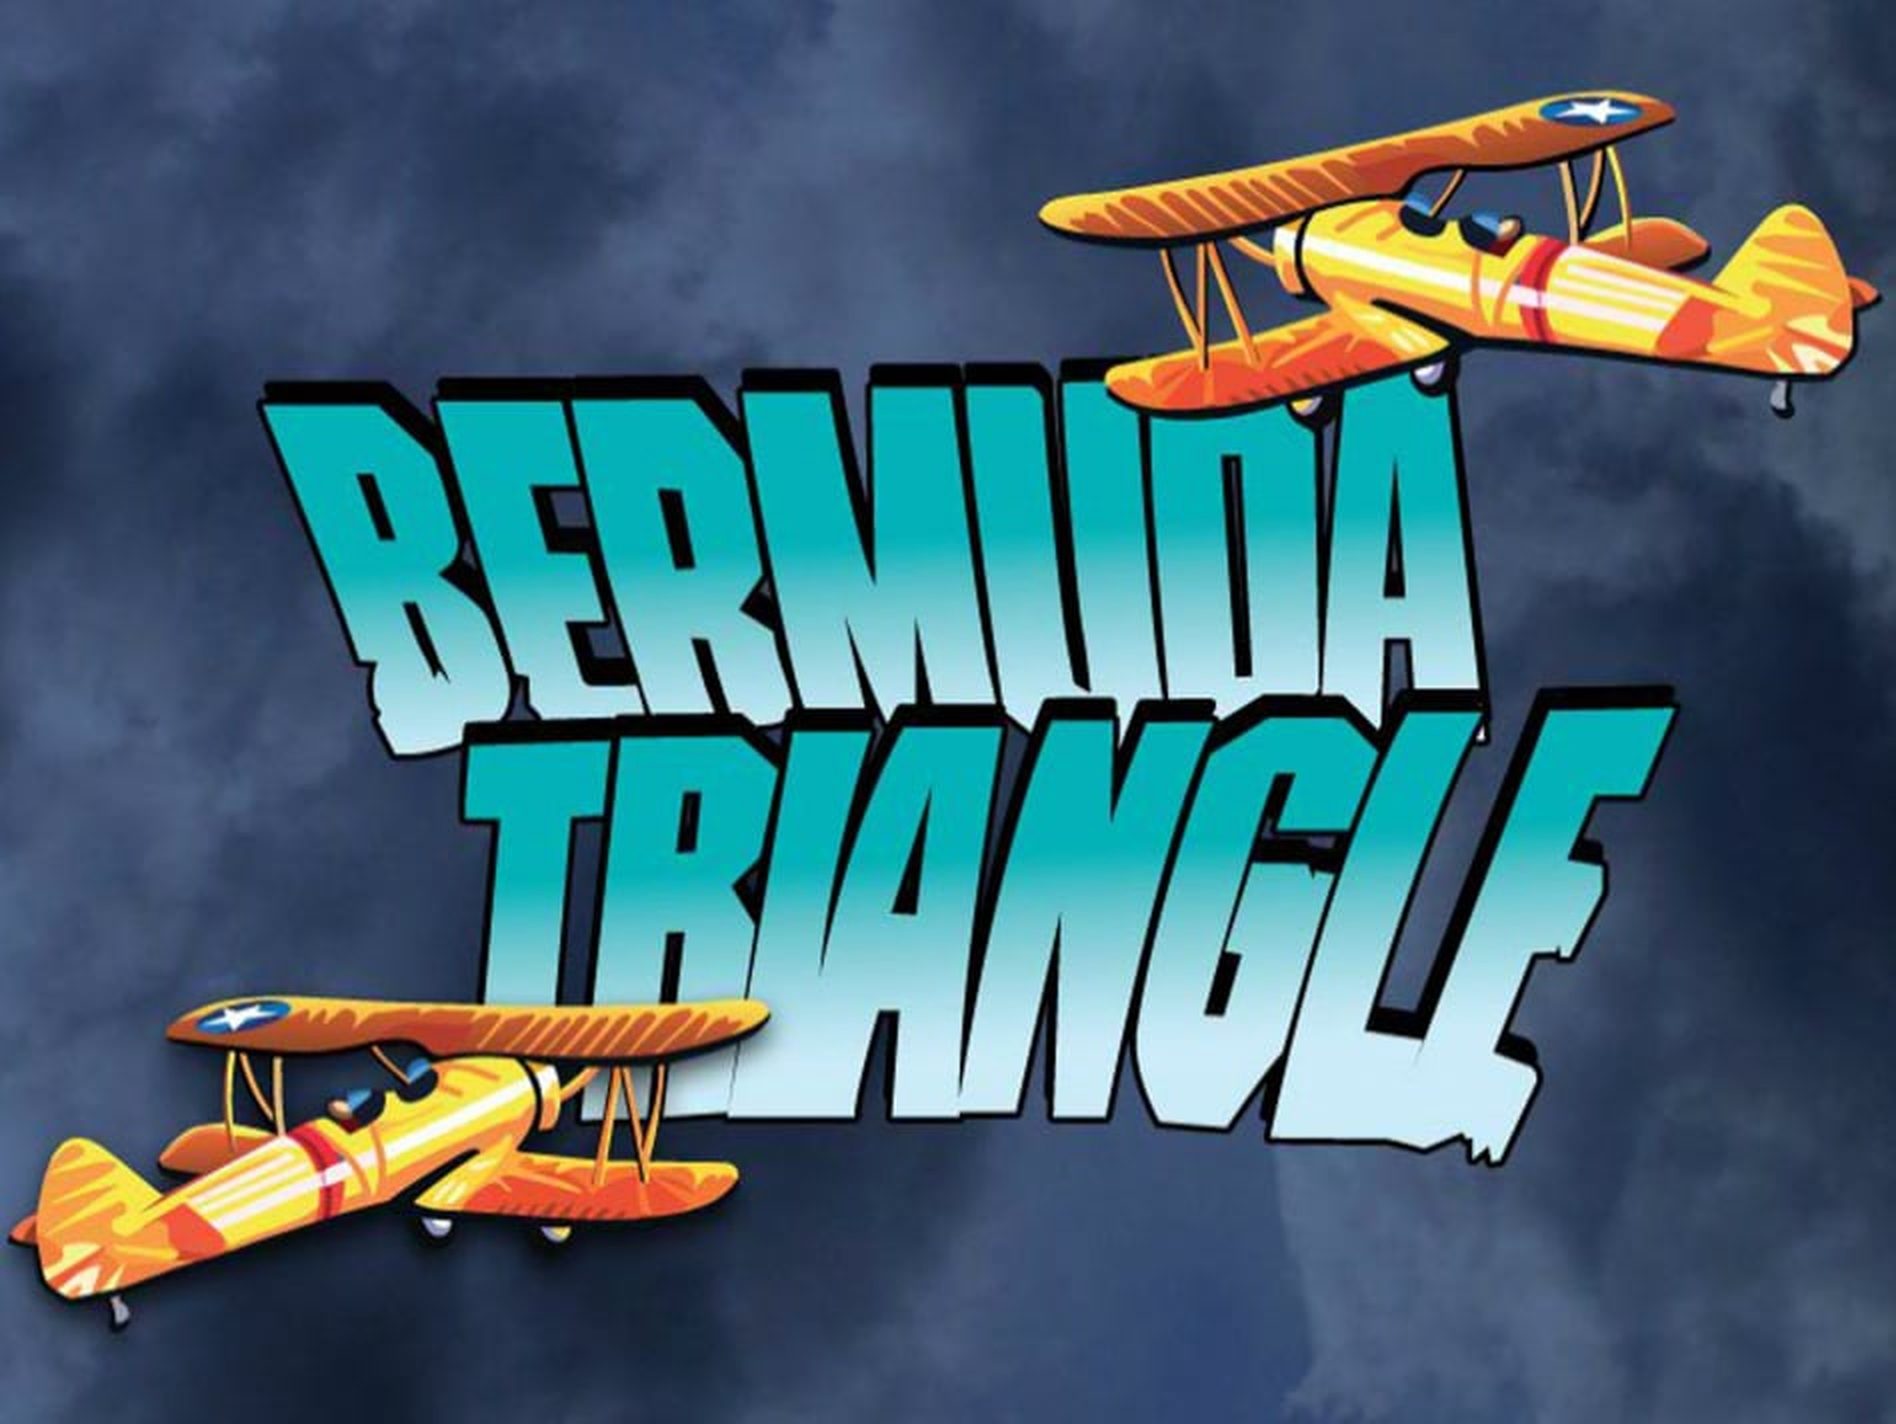 The Bermuda Triangle Online Slot Demo Game by Playtech